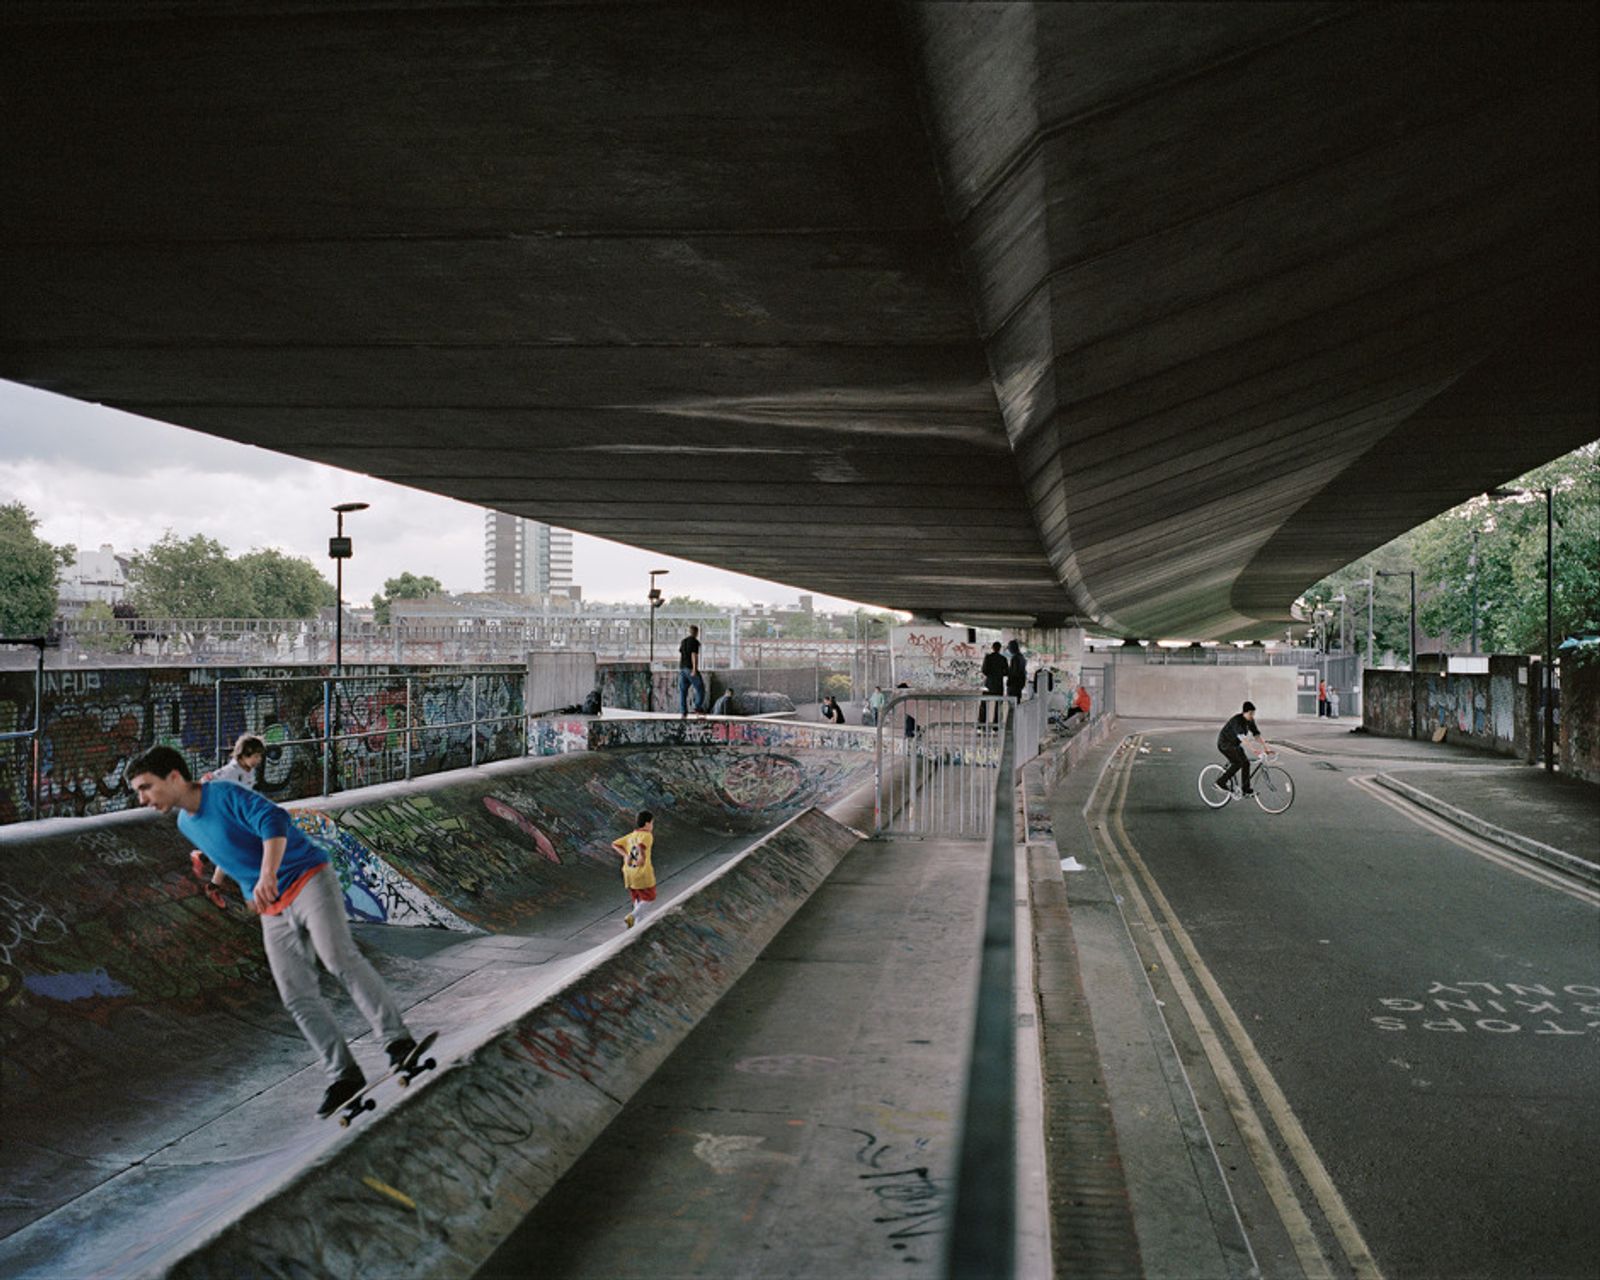 © David Sopronyi - Image from the West Way photography project